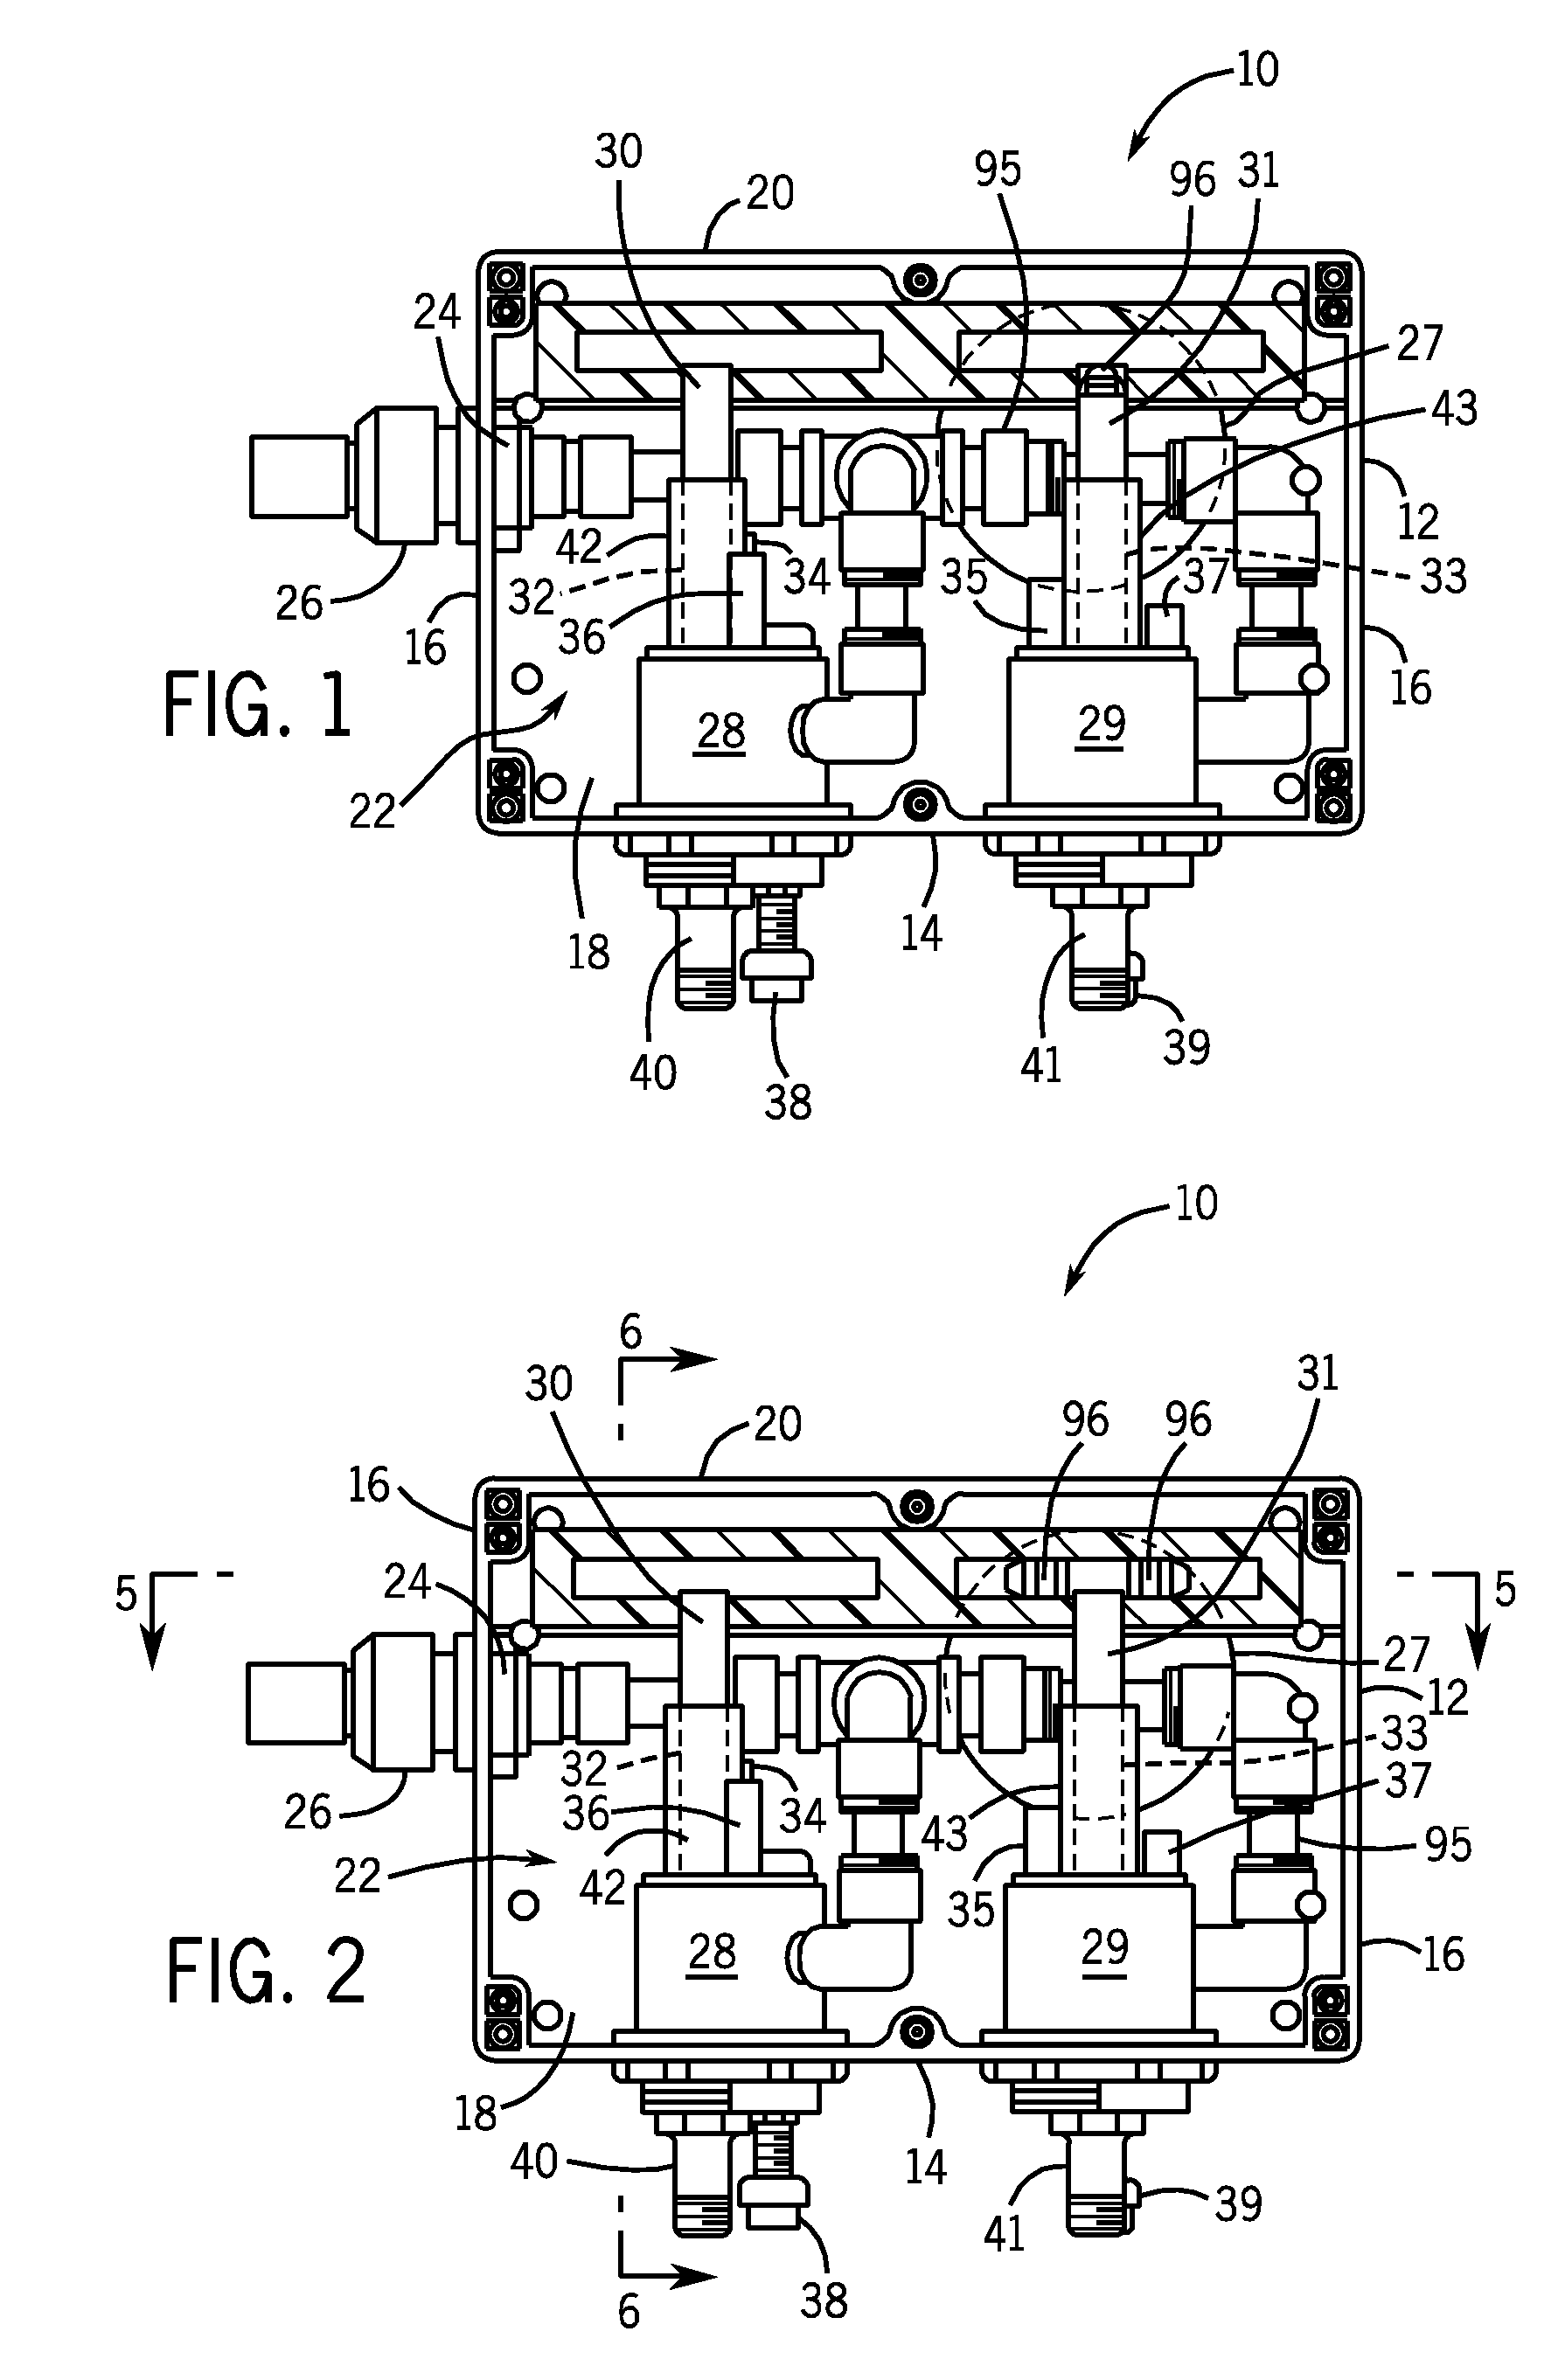 Two-stage cooling system